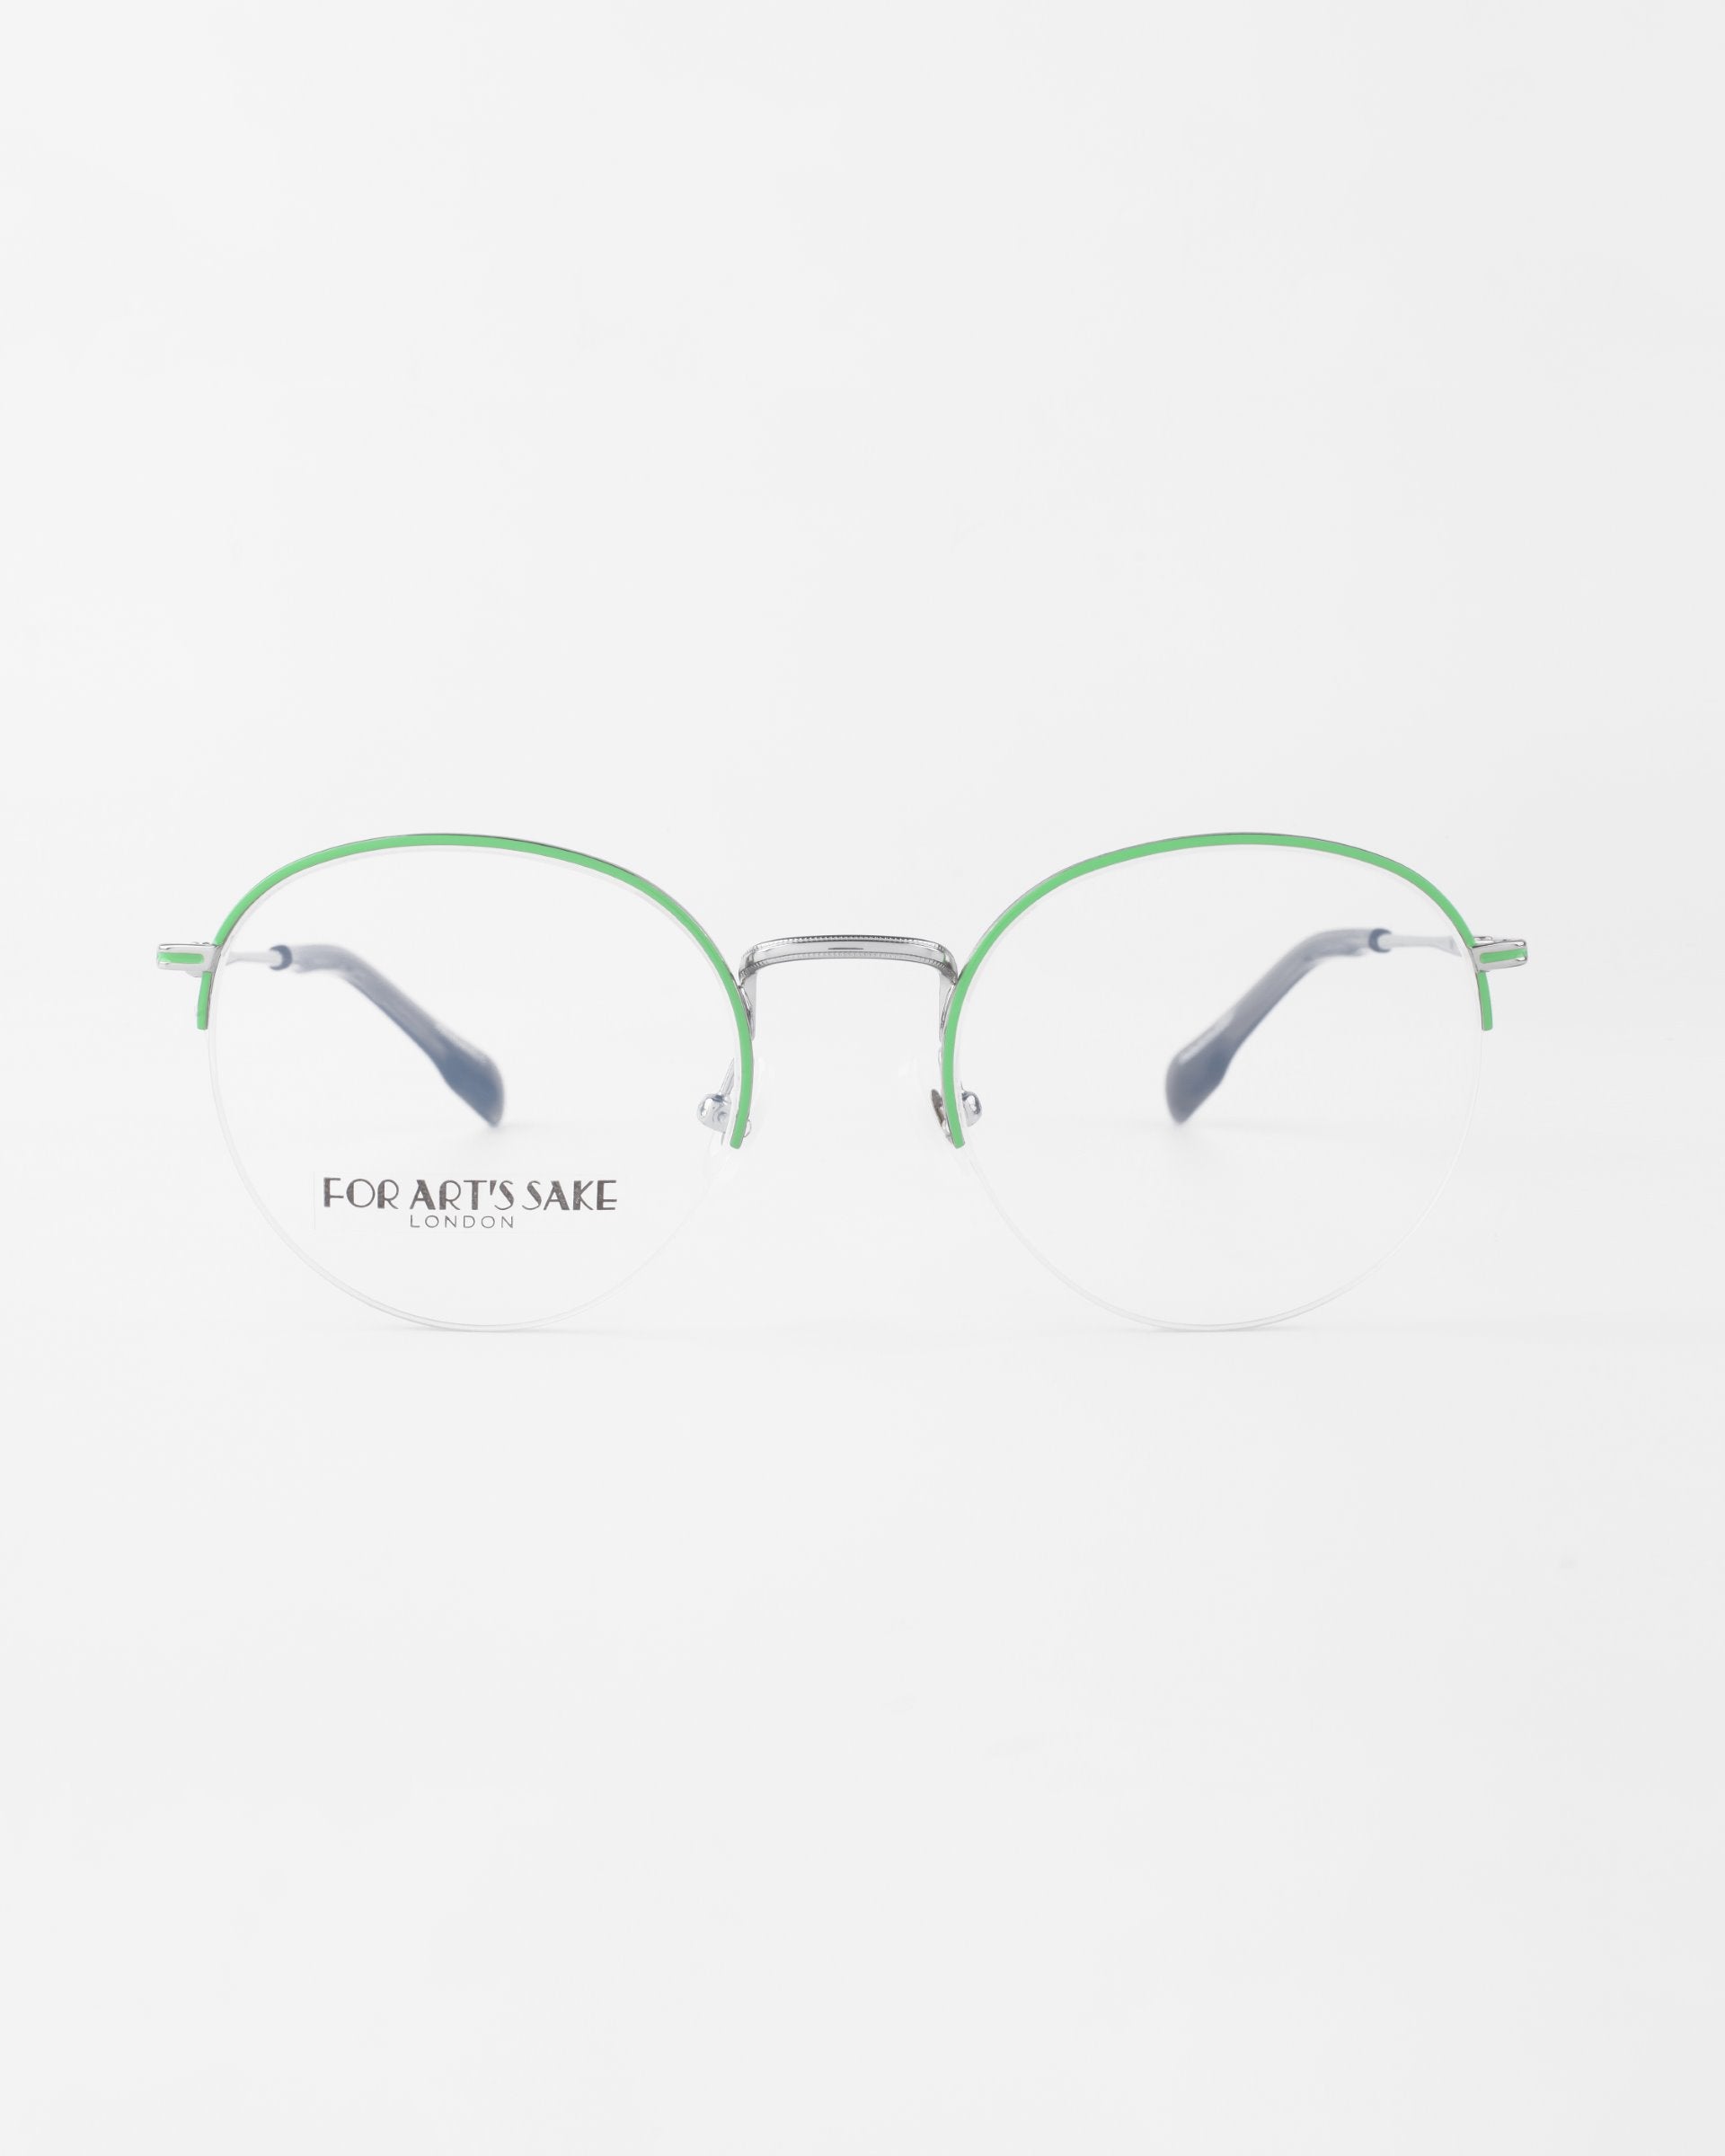 A pair of Ivy eyeglasses with thin, green metal frames and clear lenses featuring a blue light filter. The temples are silver and tipped in black. The brand name &quot;For Art&#39;s Sake®&quot; is visible on the left lens. The eyeglasses are set against a plain white background.